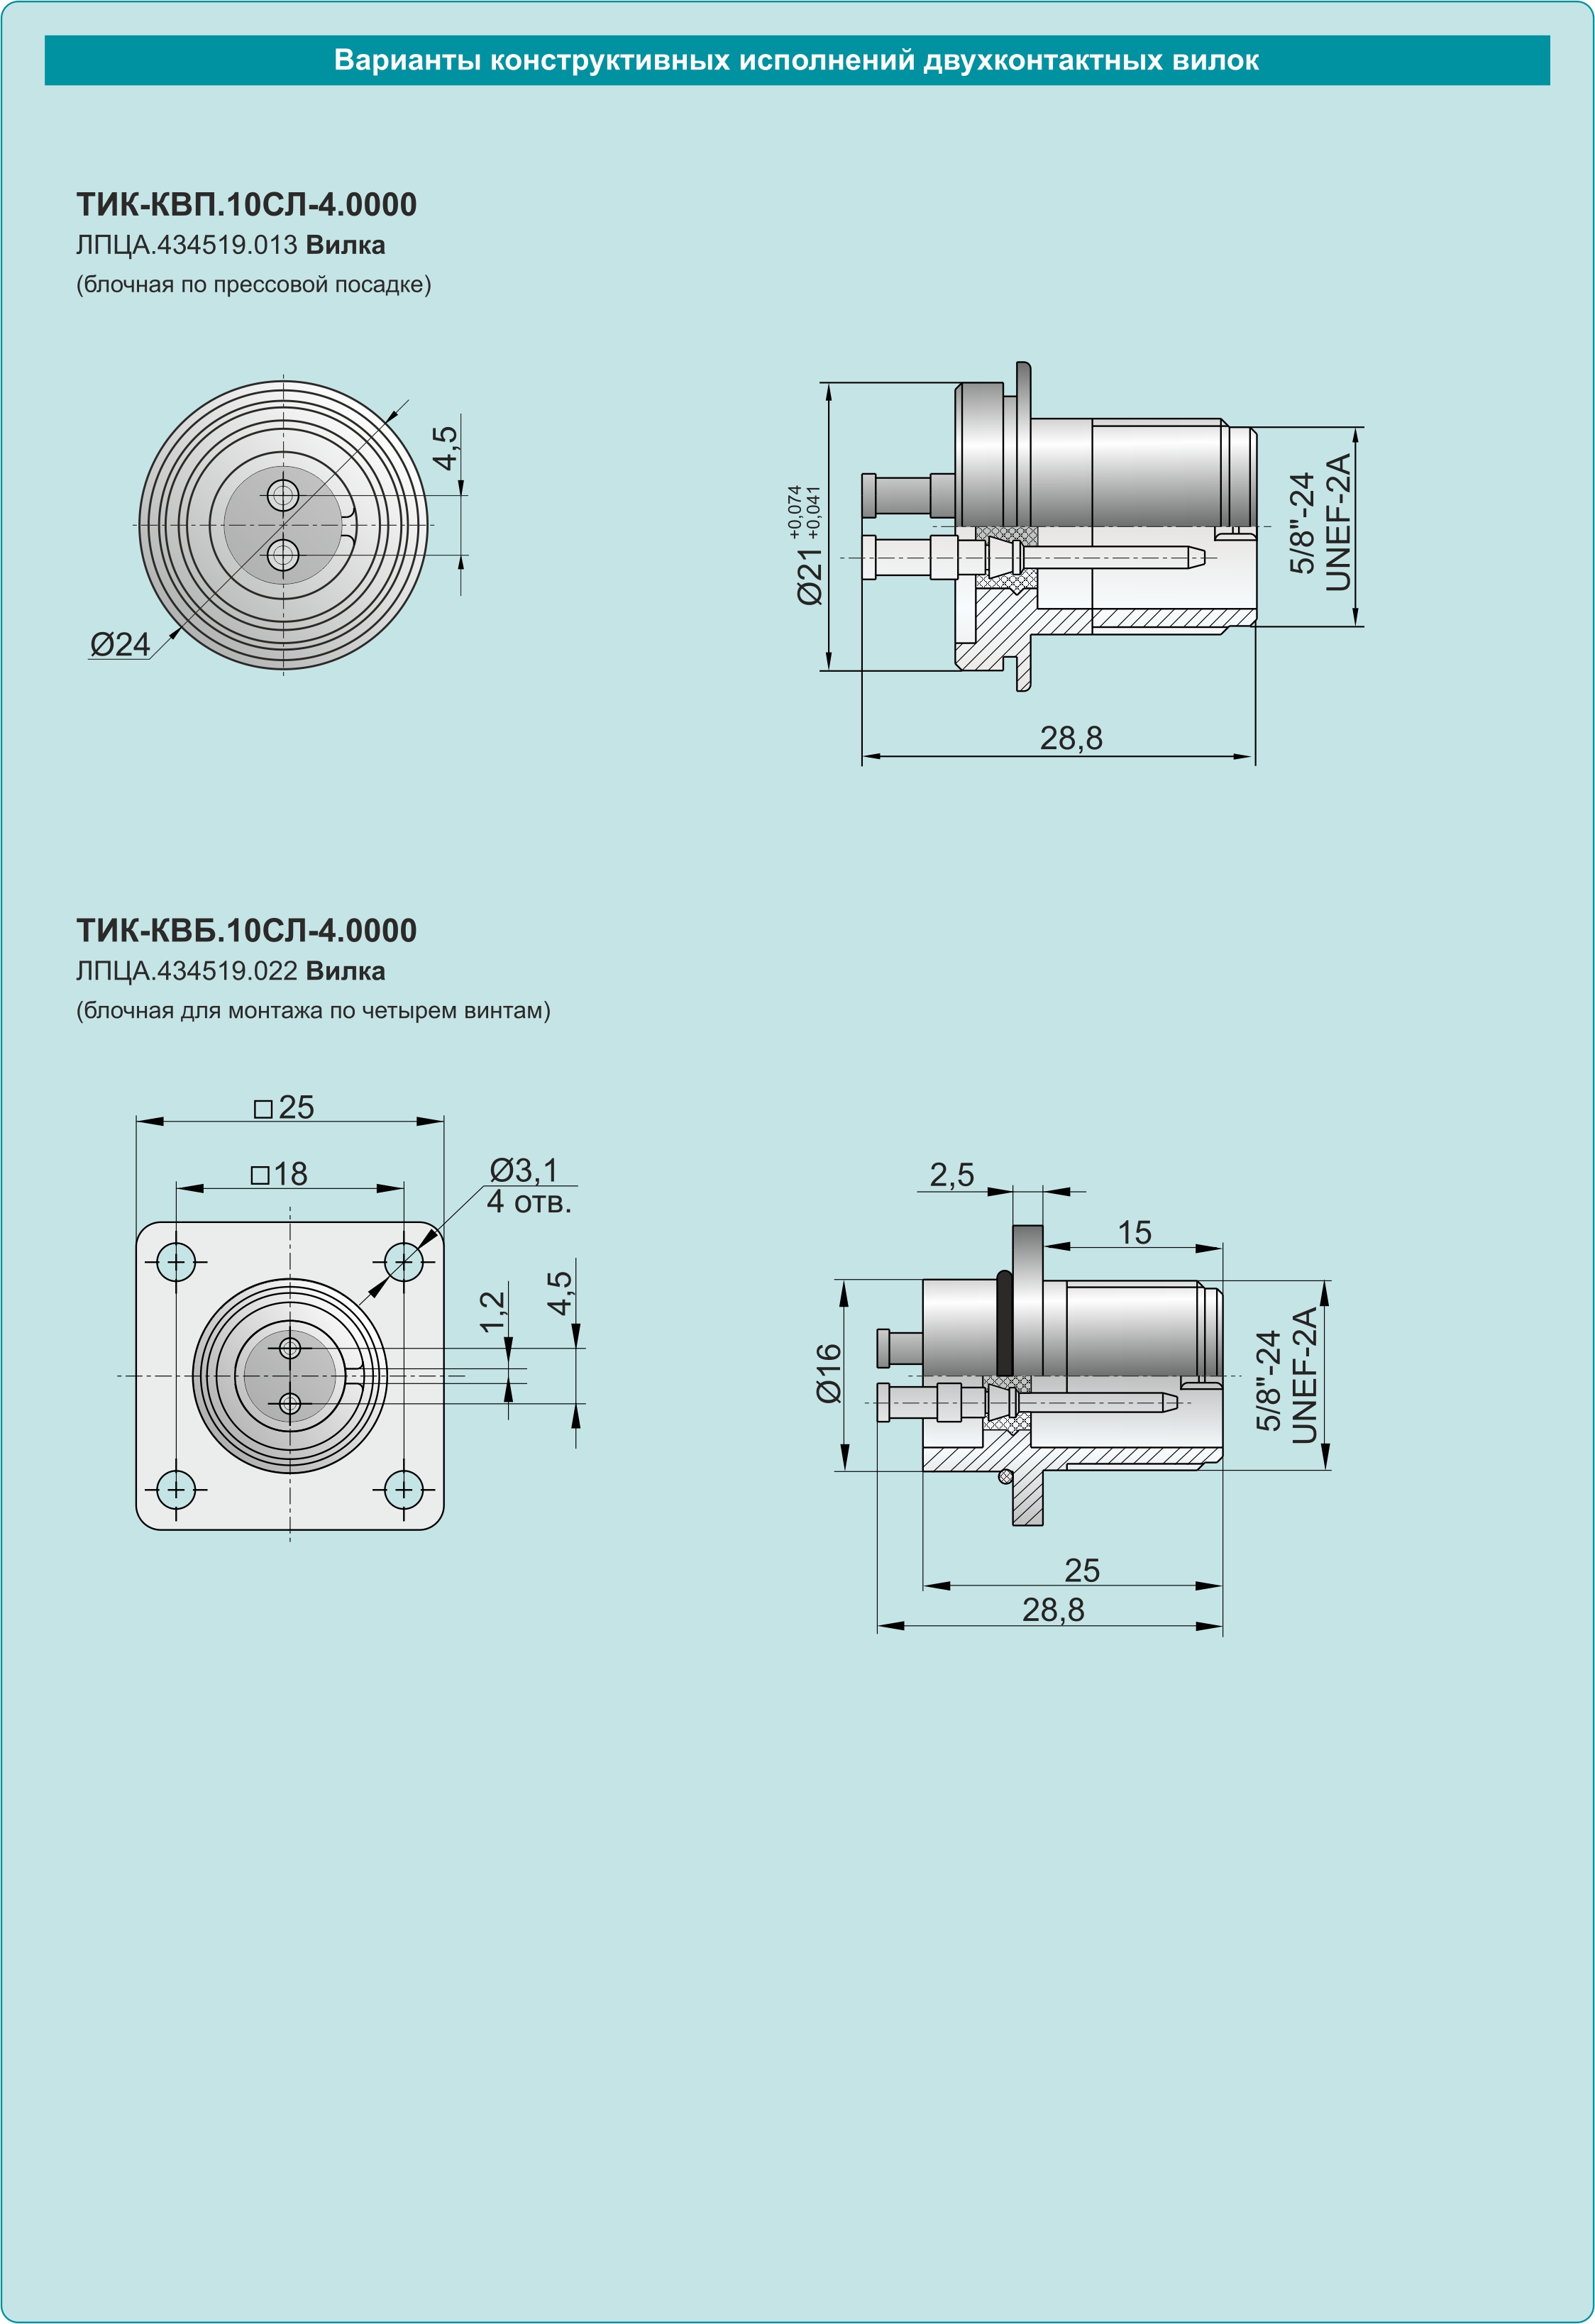 Design options for TIK two-pin plugs